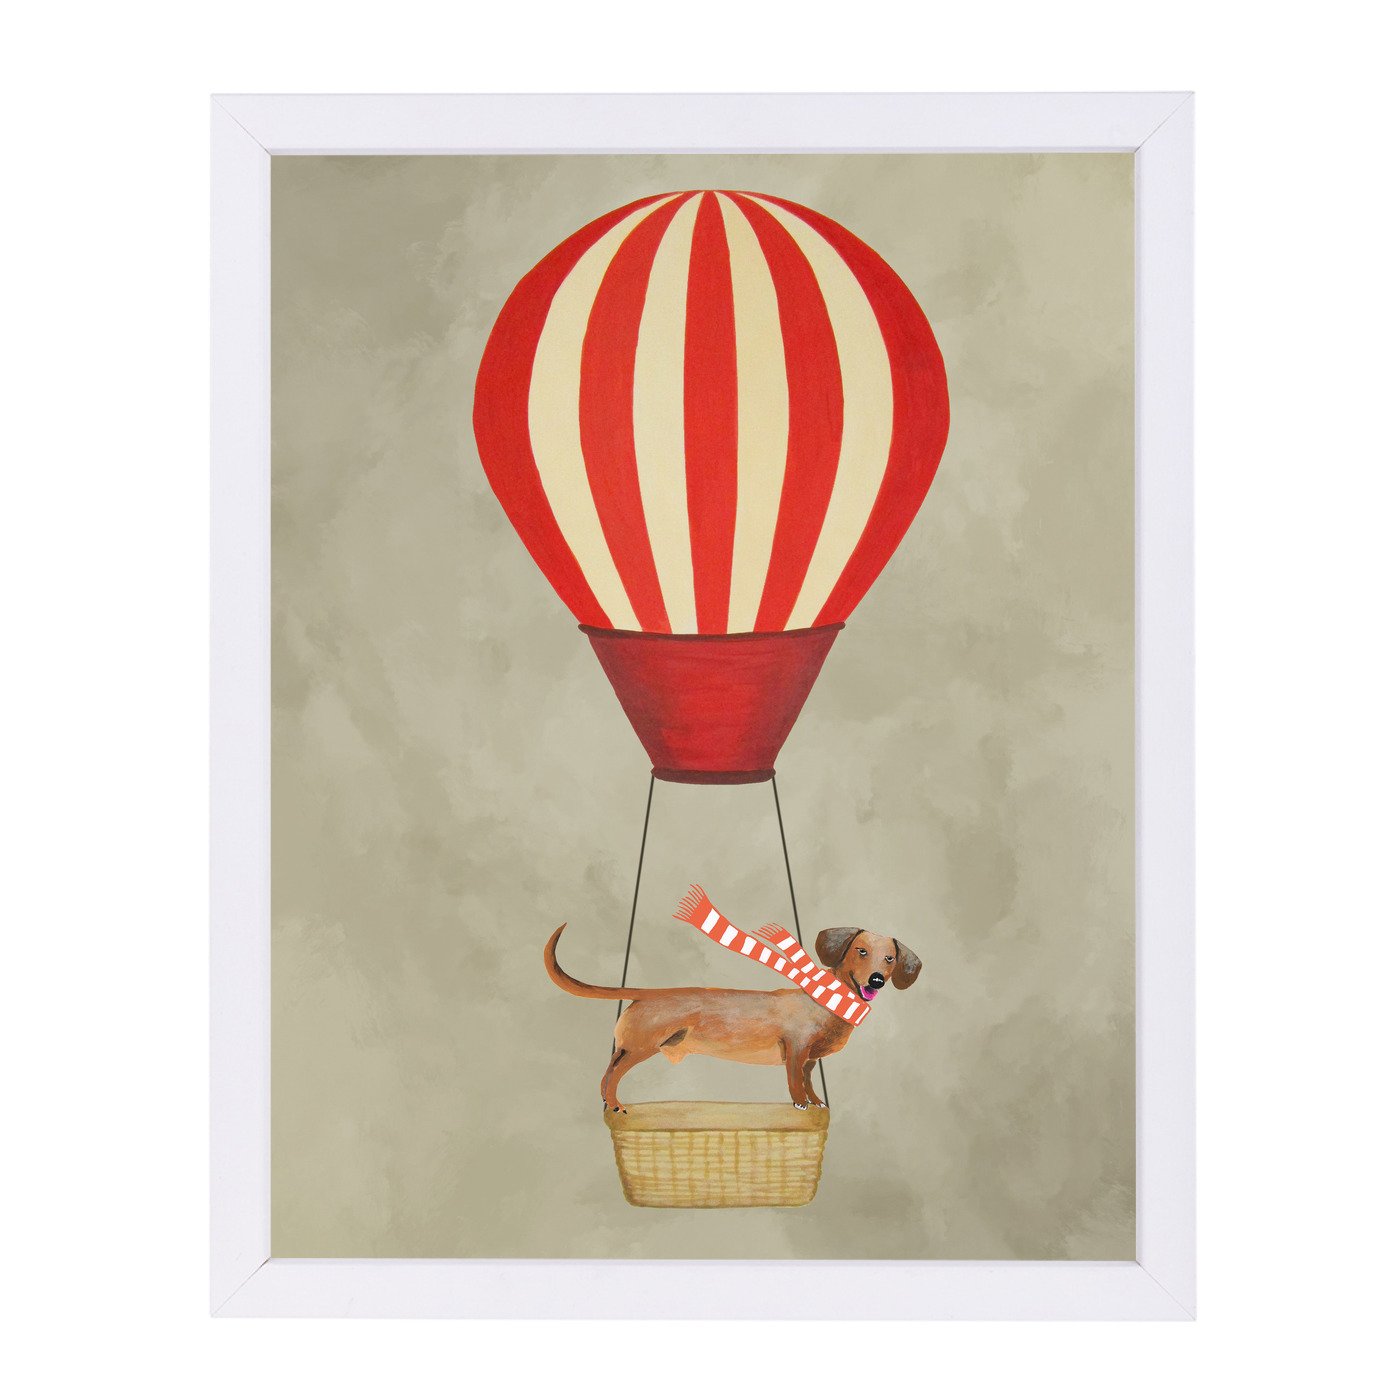 Deer With Airballoon By Coco De Paris - Framed Print - Americanflat